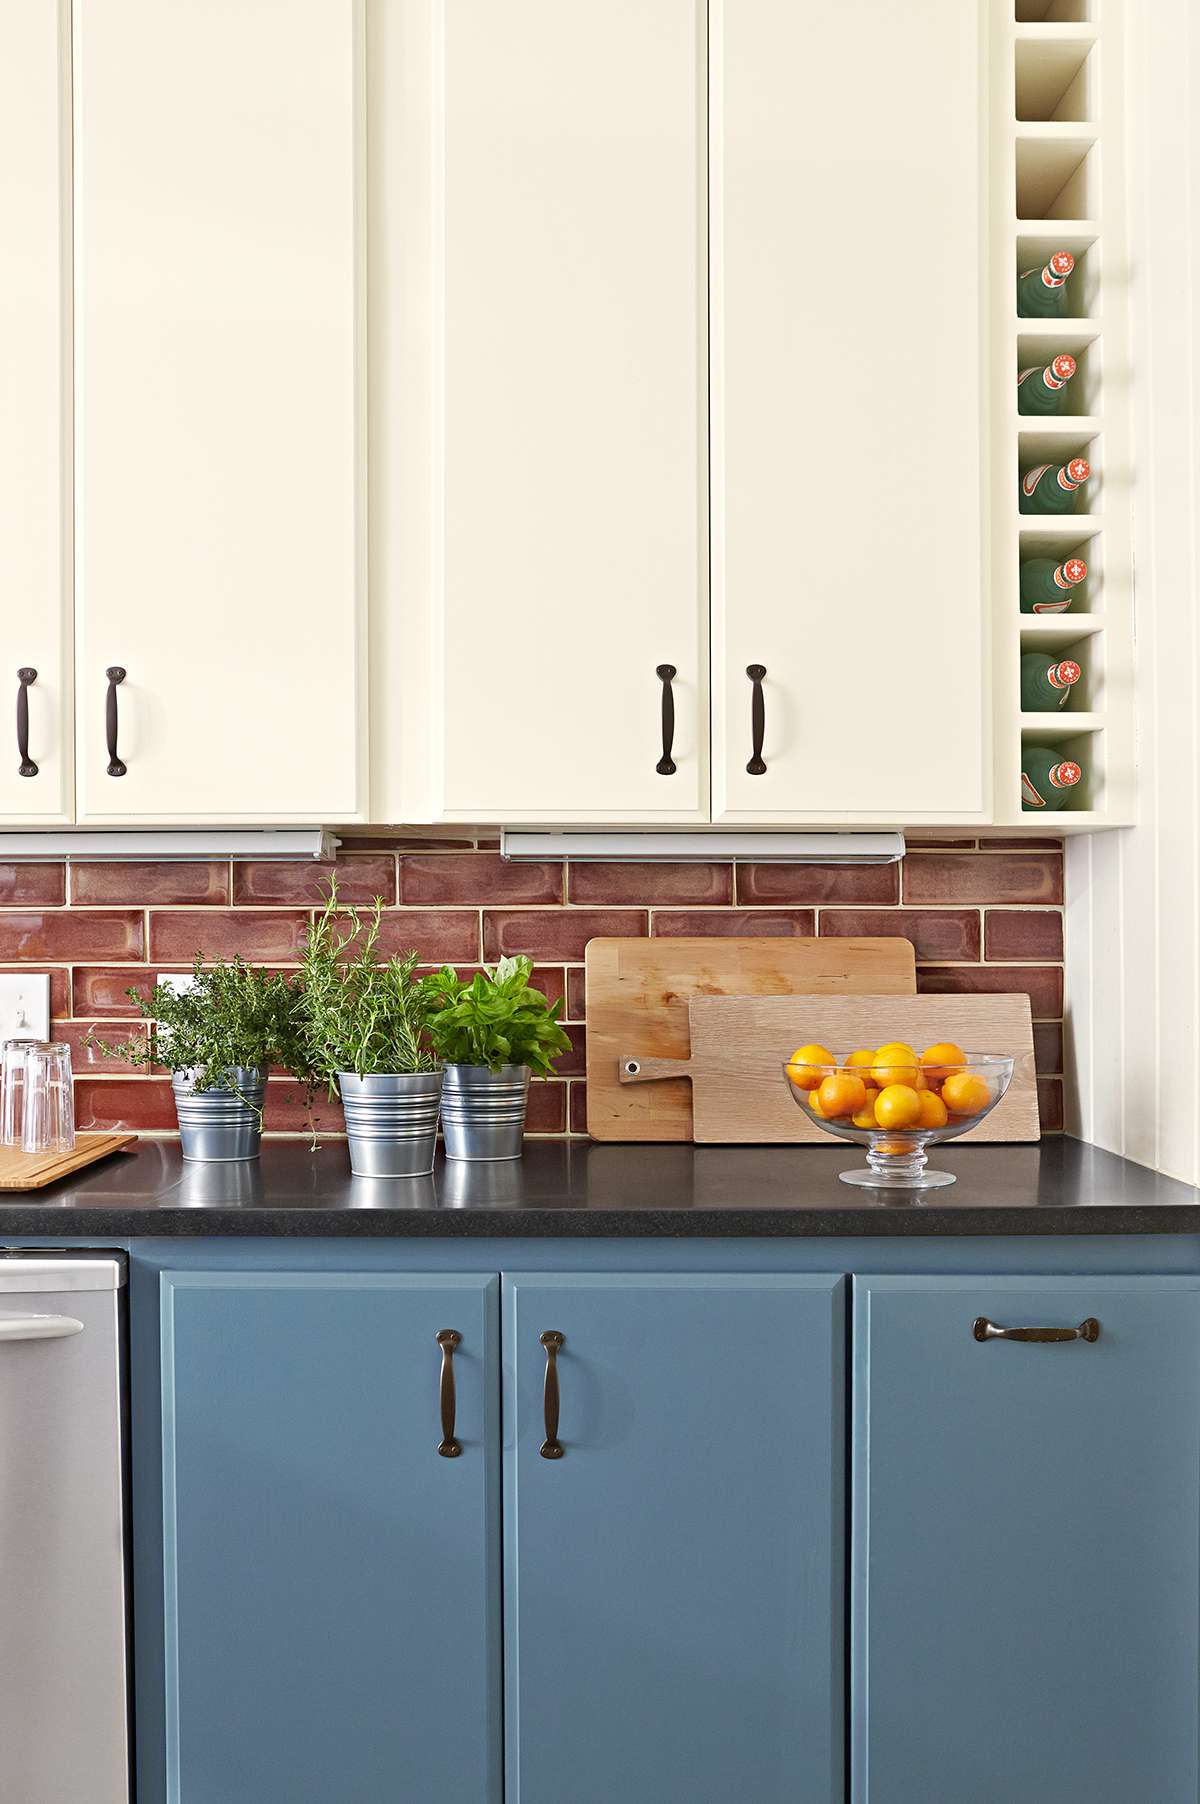 two-tone blue and white kitchen cabinets with lighting strips